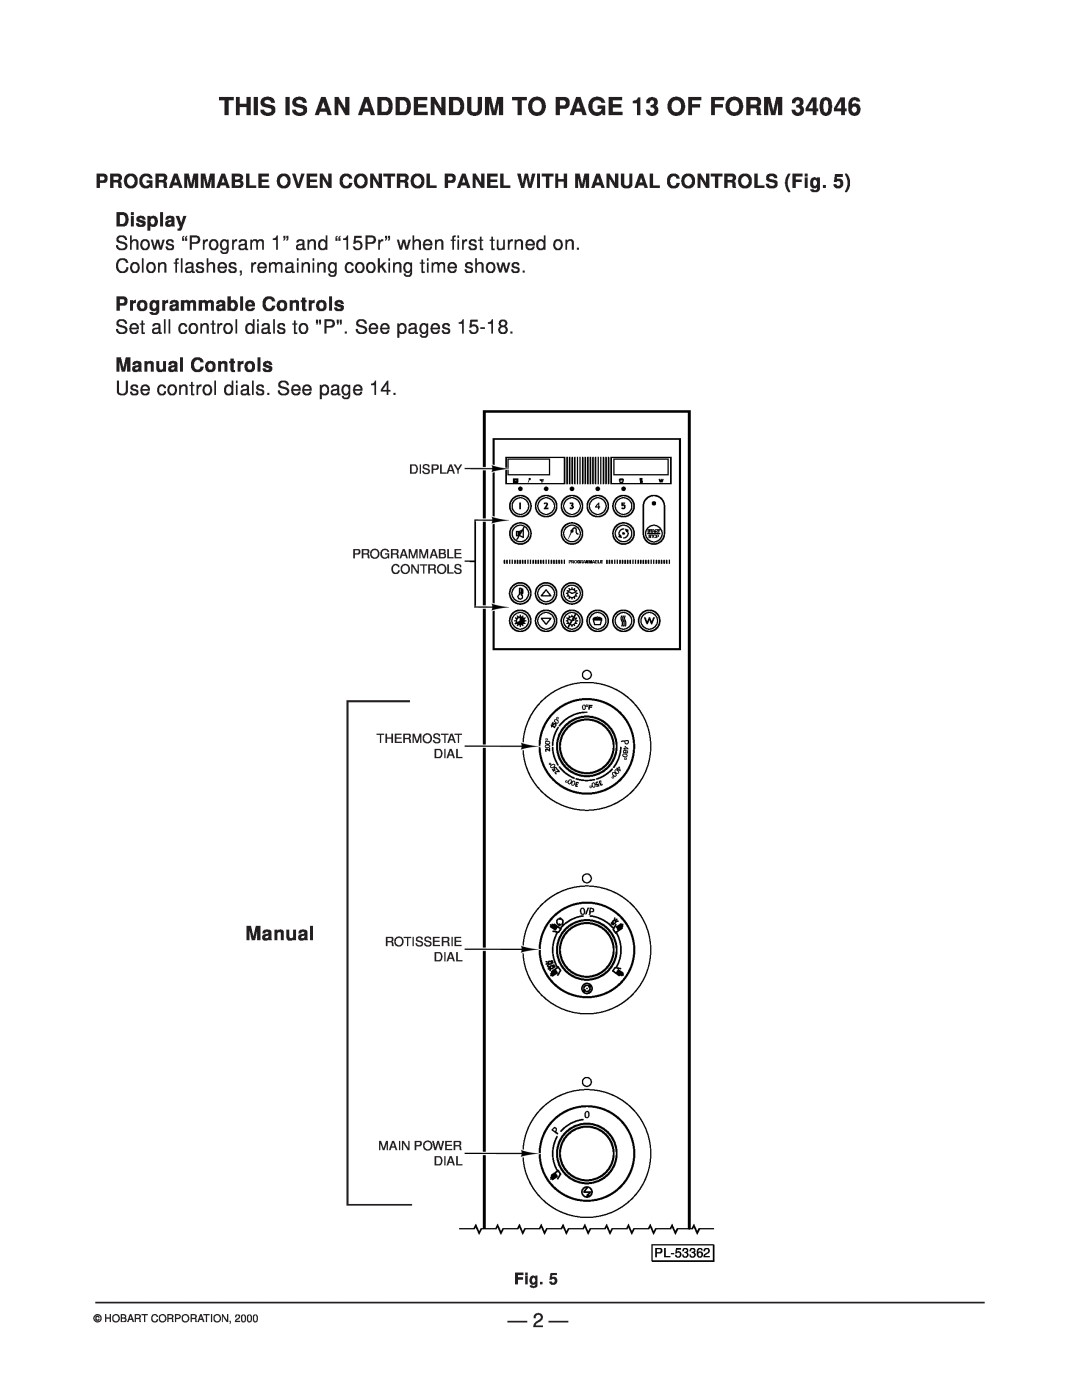 Hobart HR5 THIS IS AN ADDENDUM TO PAGE 13 OF FORM, Display, Programmable Controls, Manual Controls, Hobart Corporation 